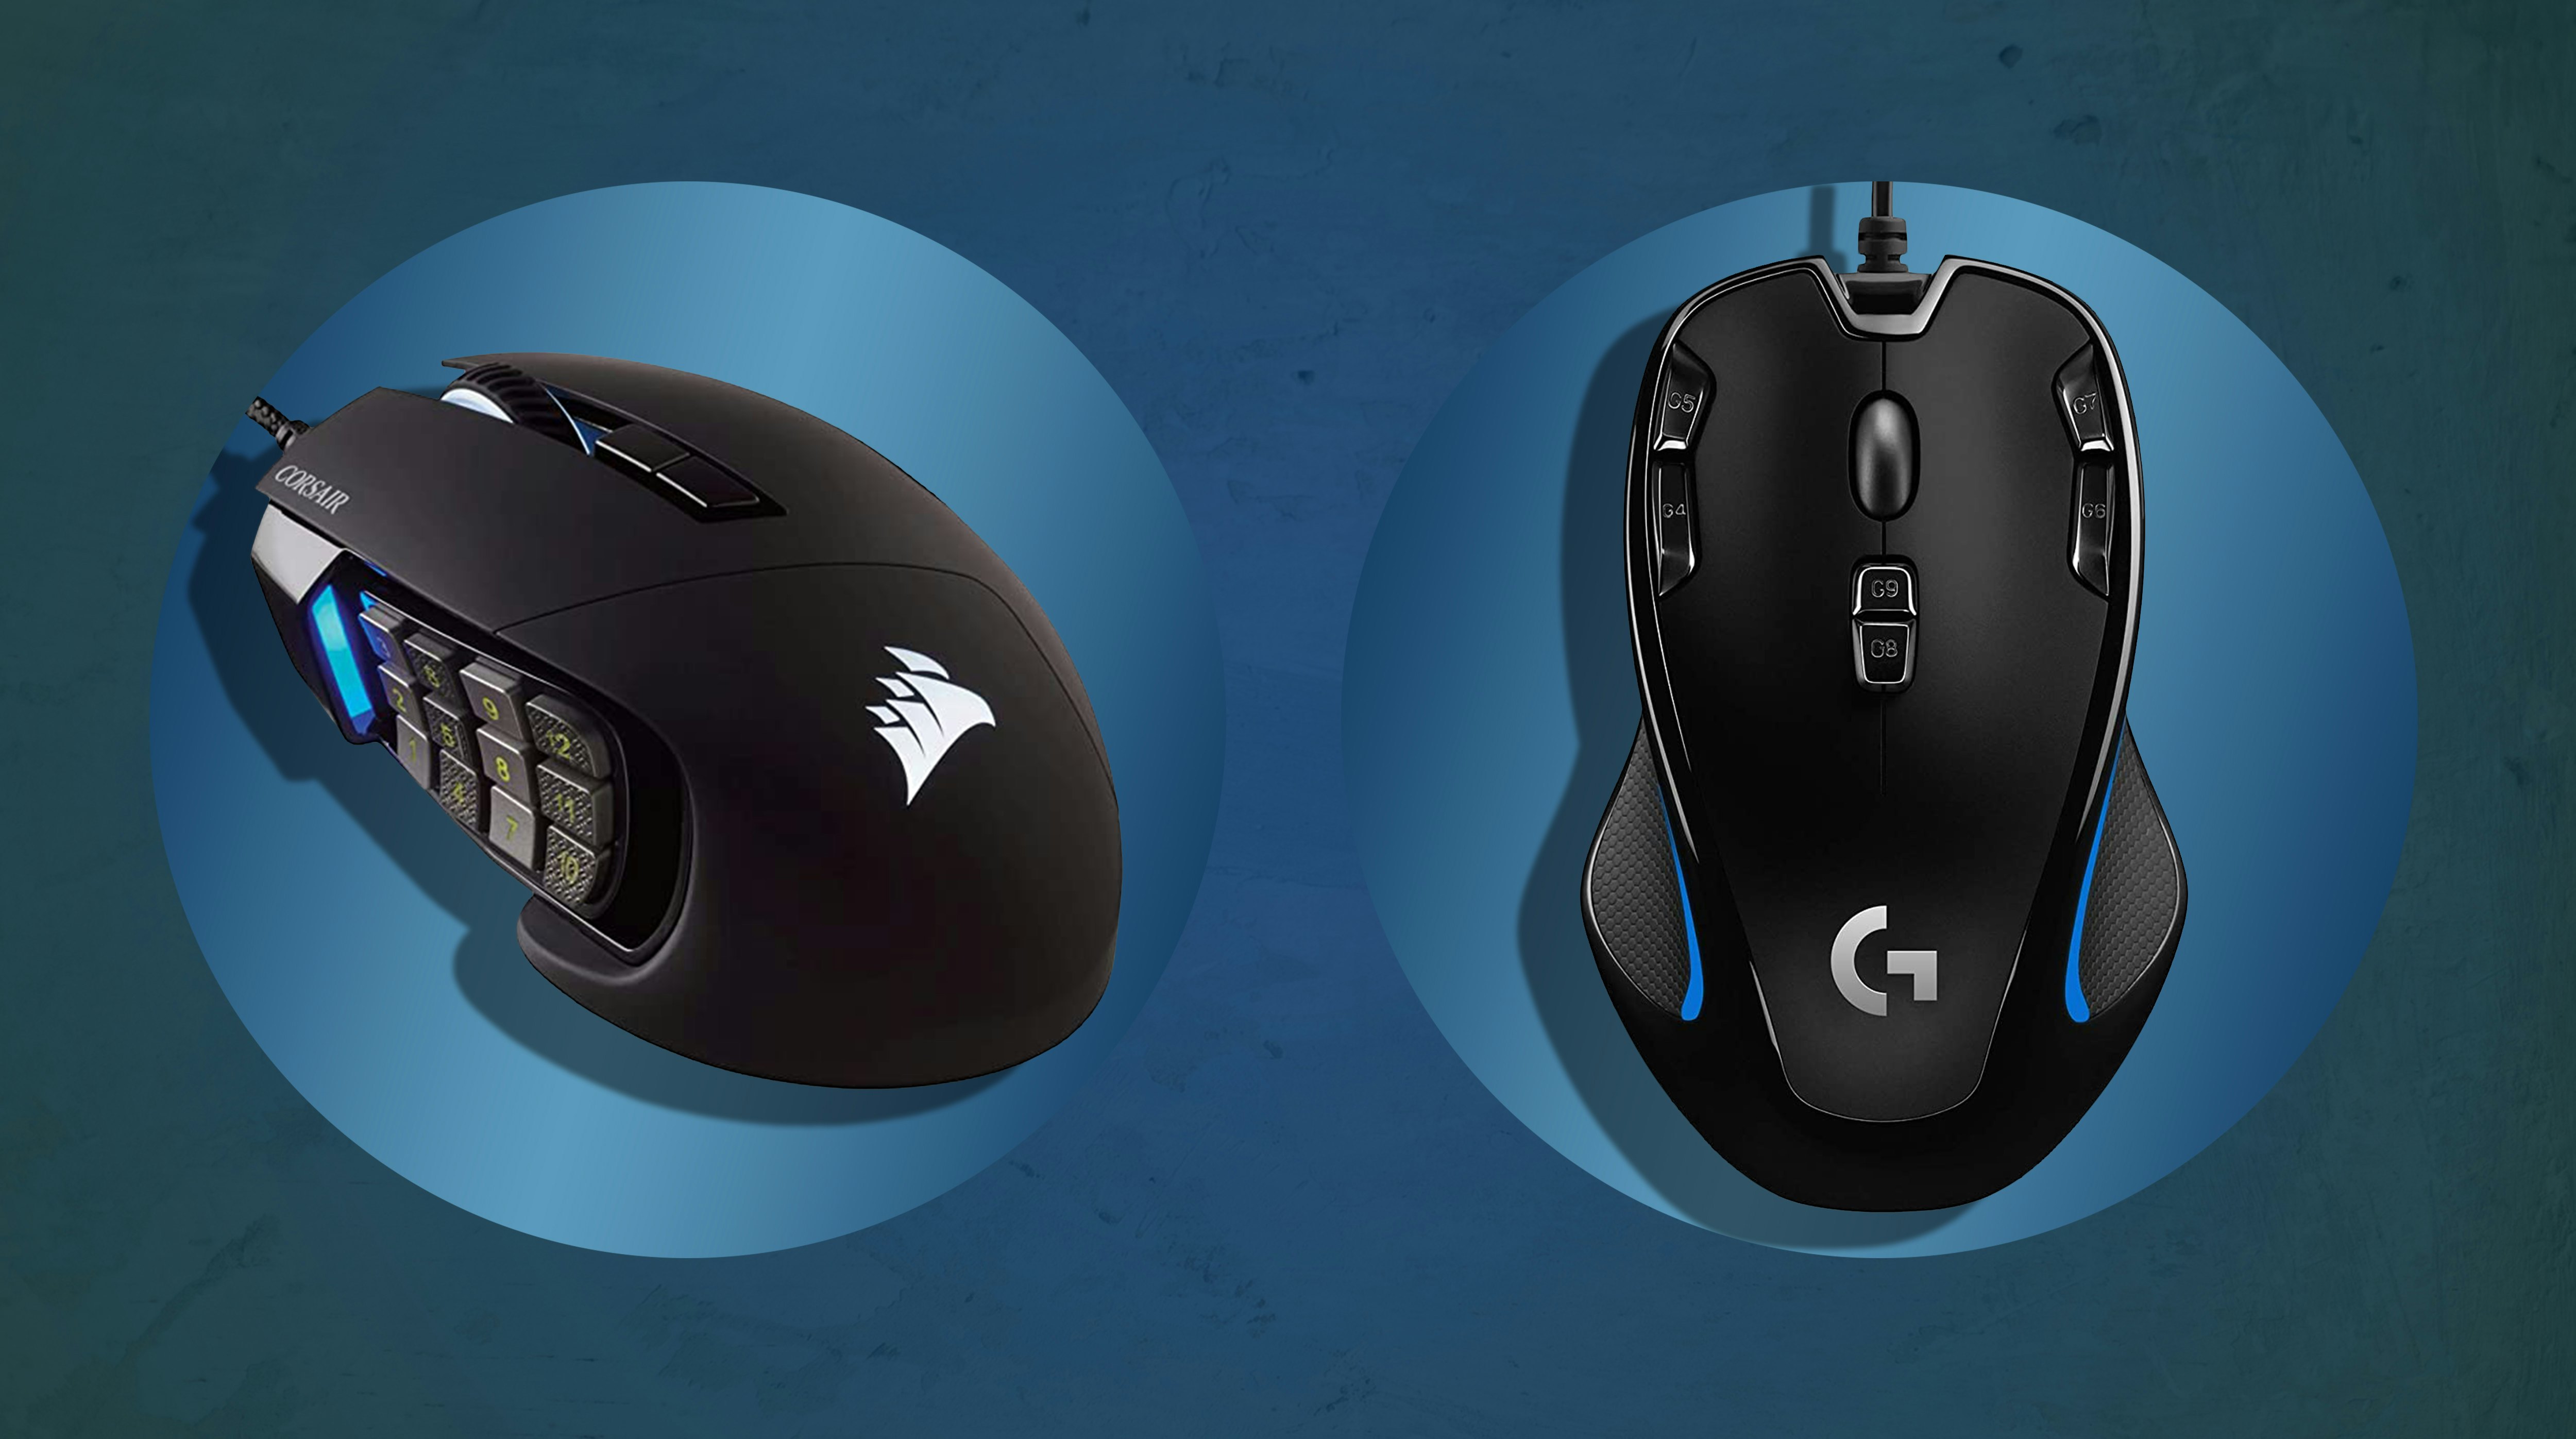 Model O Minus: Wireless Gaming Mouse for Small Hands - Glorious Gaming